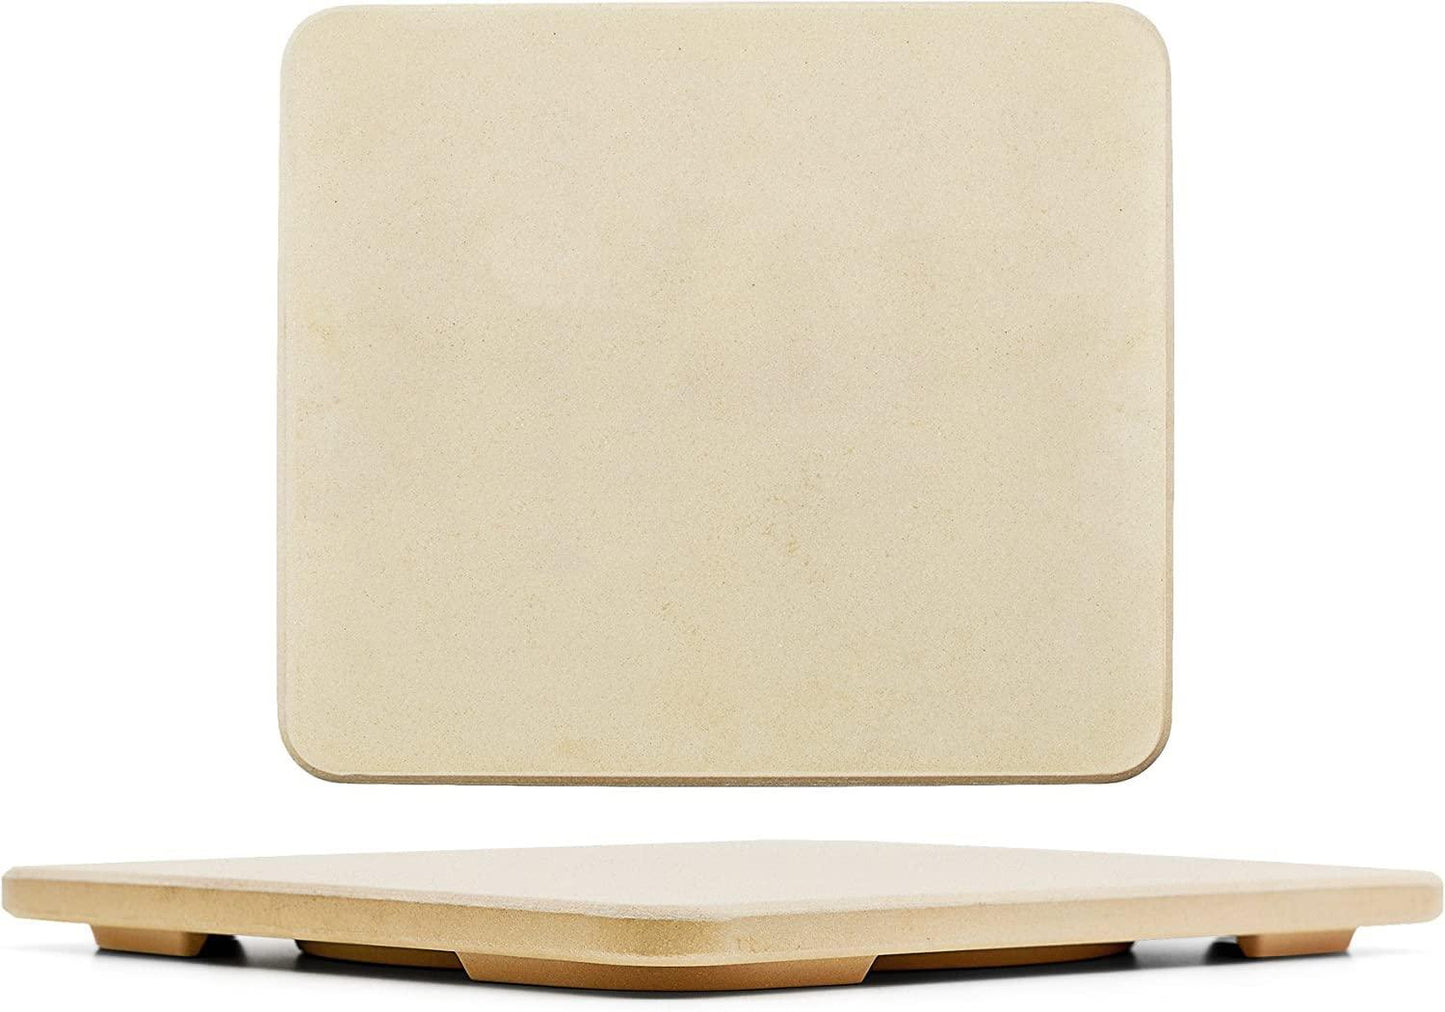 Pizza Stone - Baking Stone. SOLIDO Rectangular 14"x16" - Perfect for Oven, BBQ and Grill - CookCave